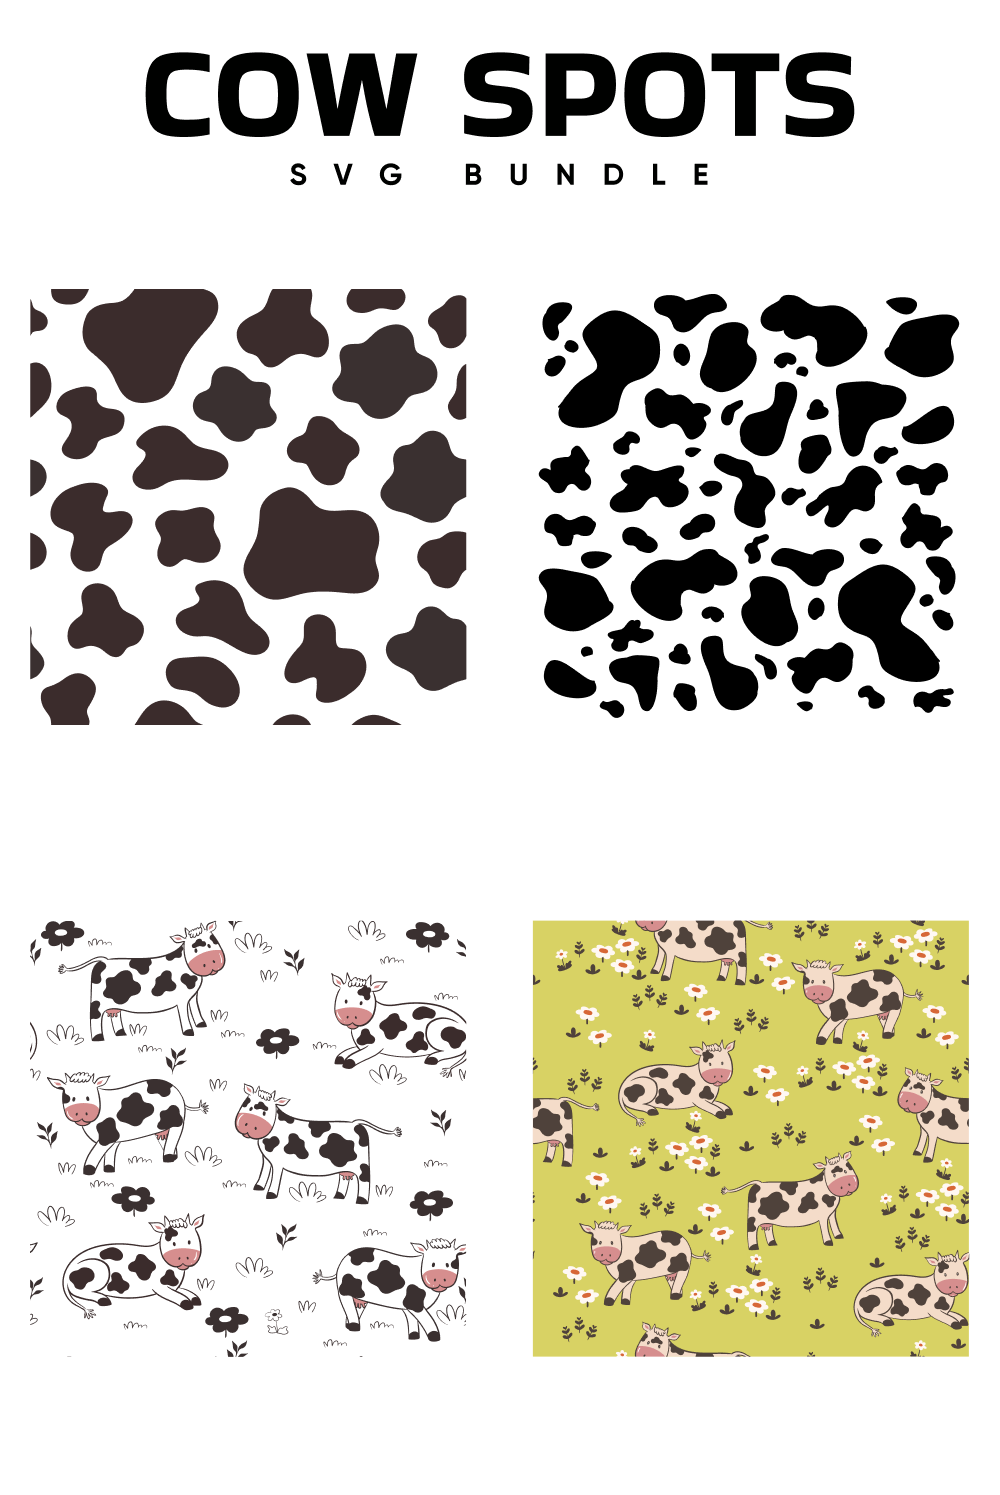 Image of color and black and white prints with cow spots.